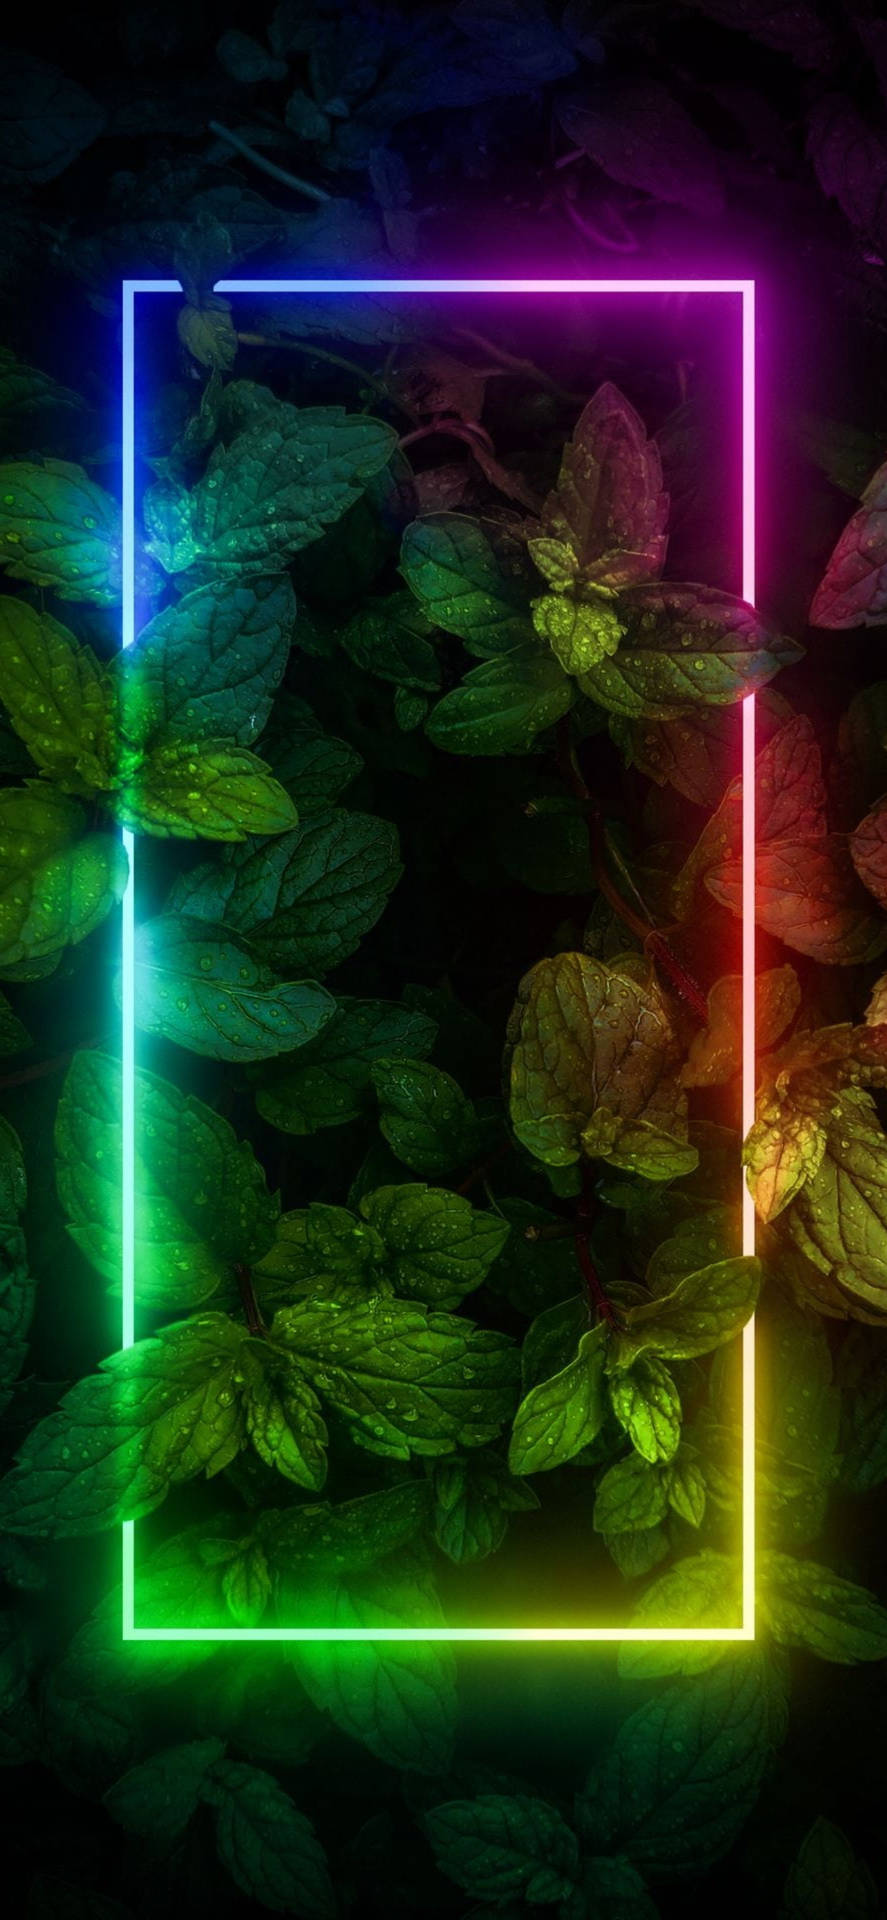 Plants With Border Neon Aesthetic Iphone Background